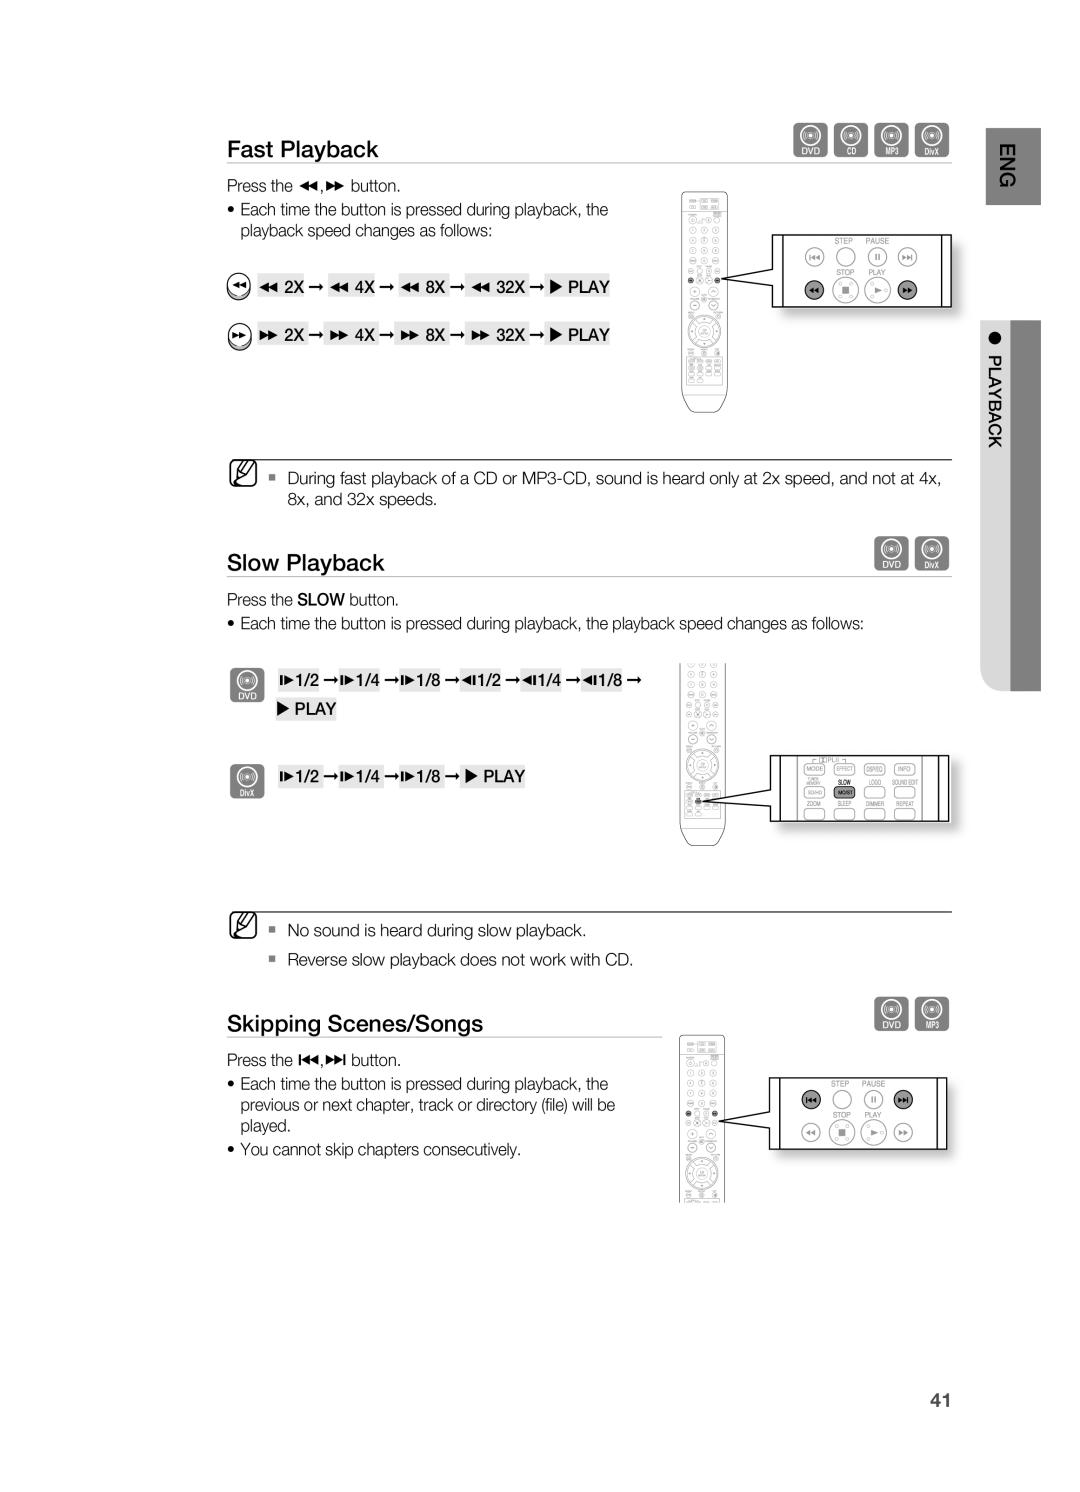 Samsung HT-TZ515 user manual dBAD, Fast Playback, Slow Playback, Skipping Scenes/Songs 